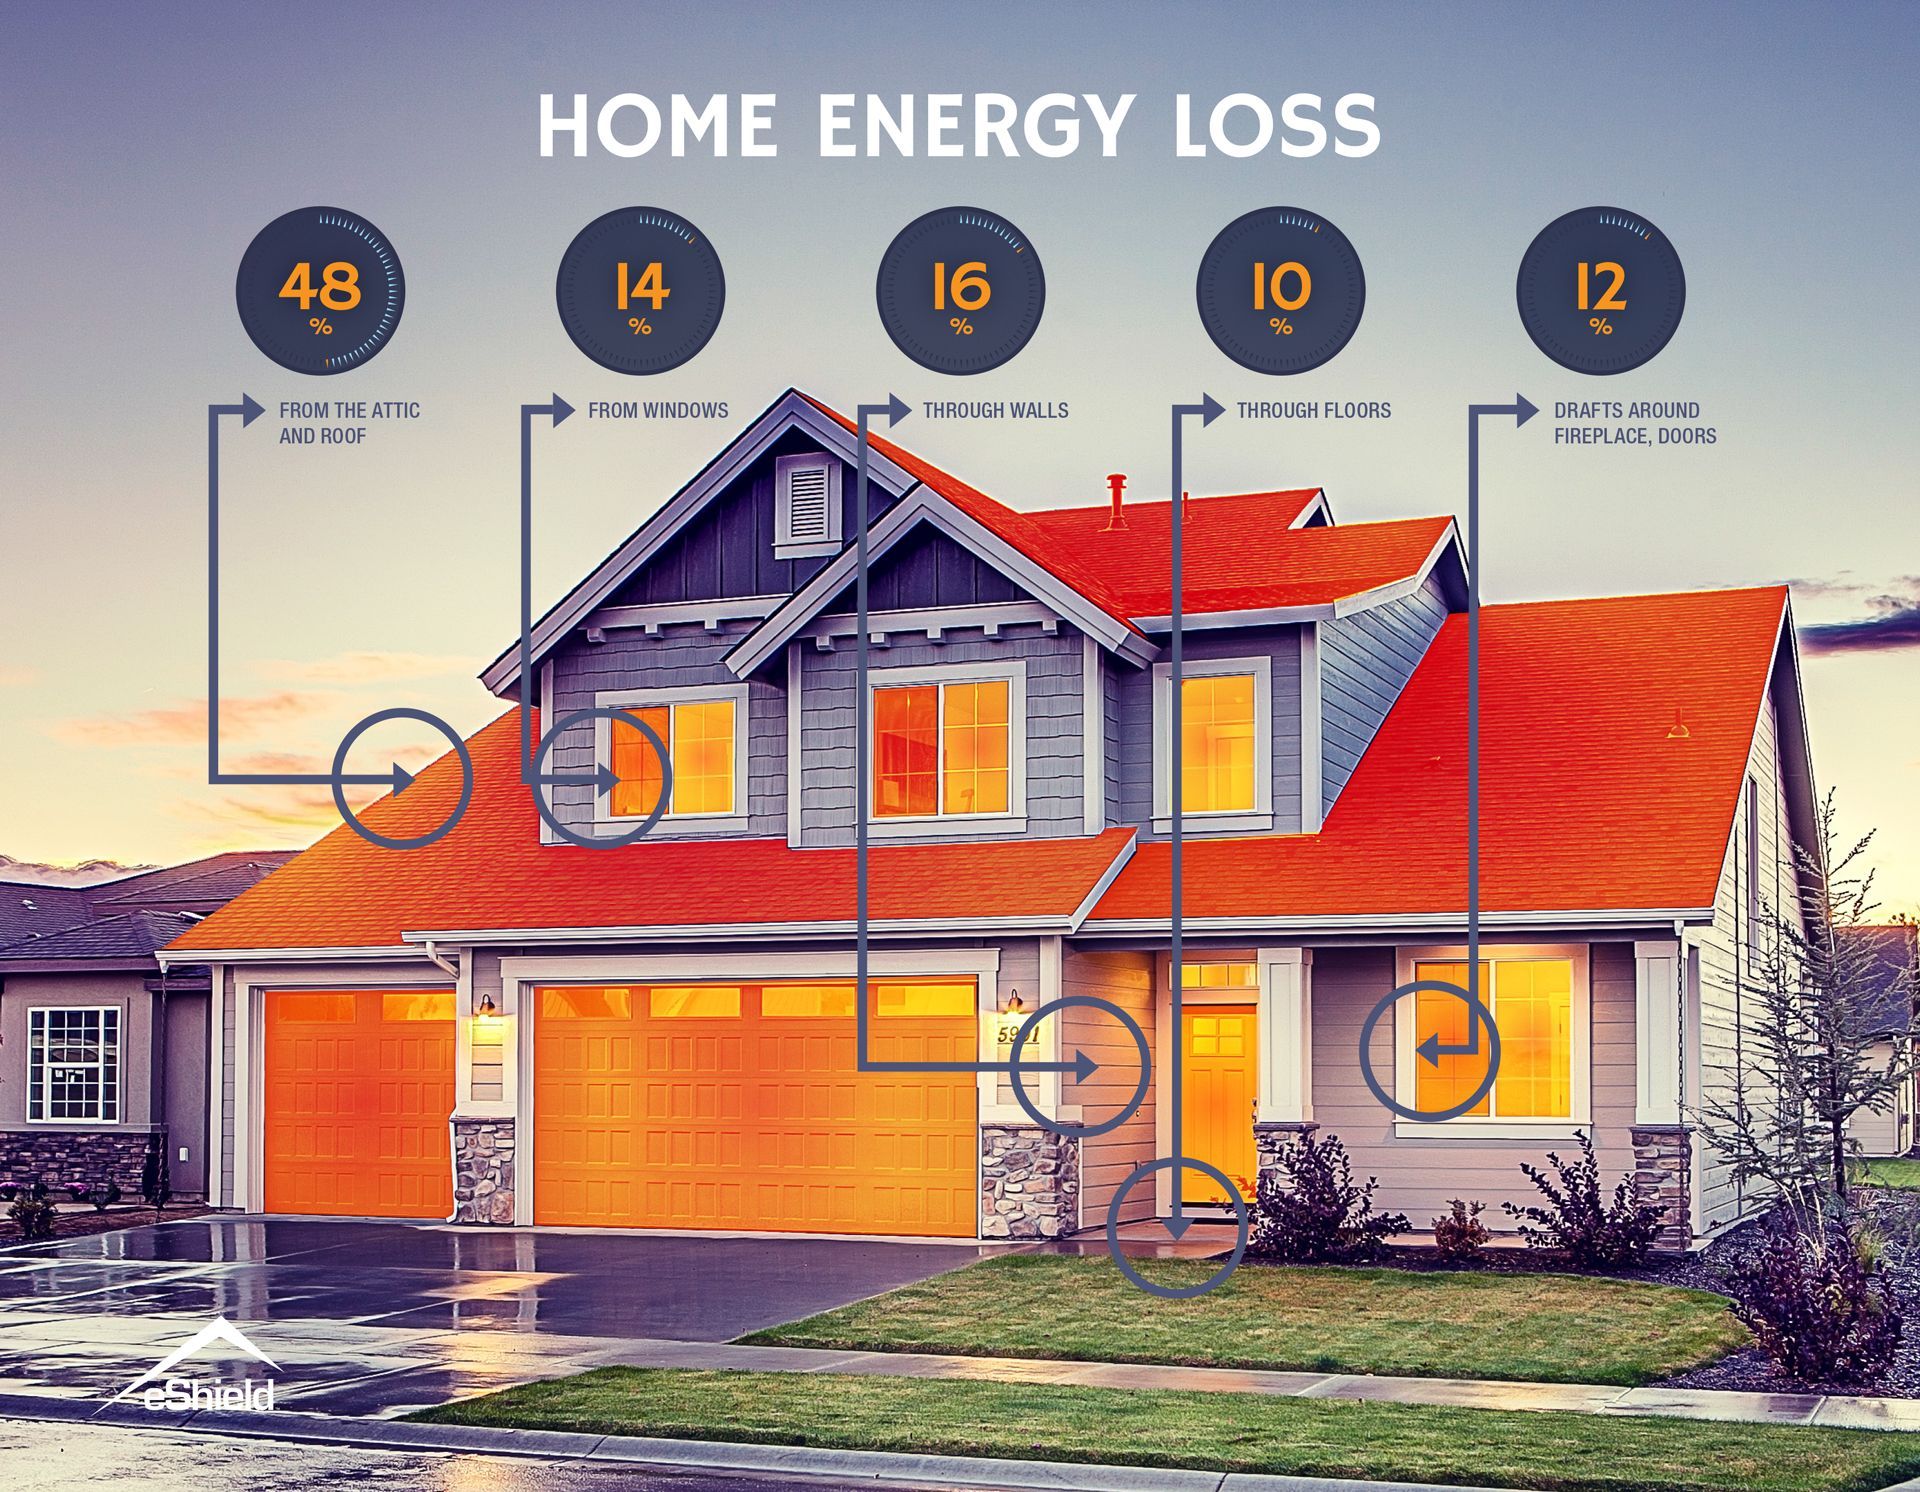 Percentages of home energy lost